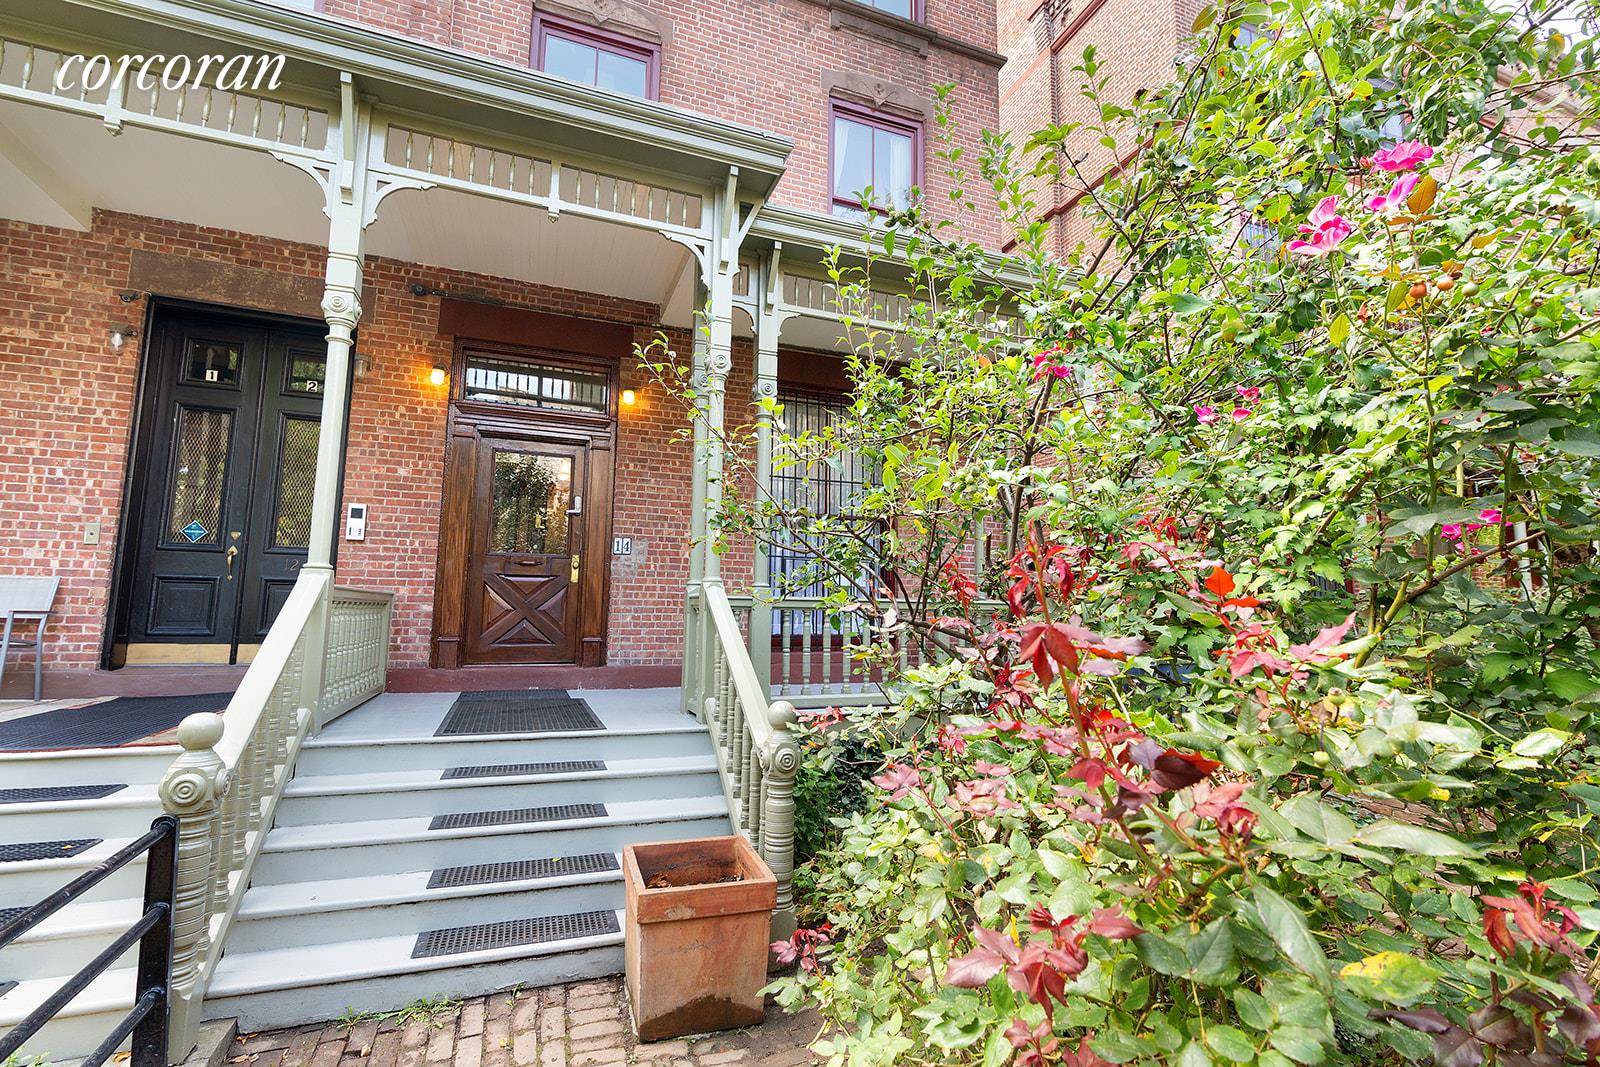 PRICE REDUCTION. Historic District Astor RowTownhouse.